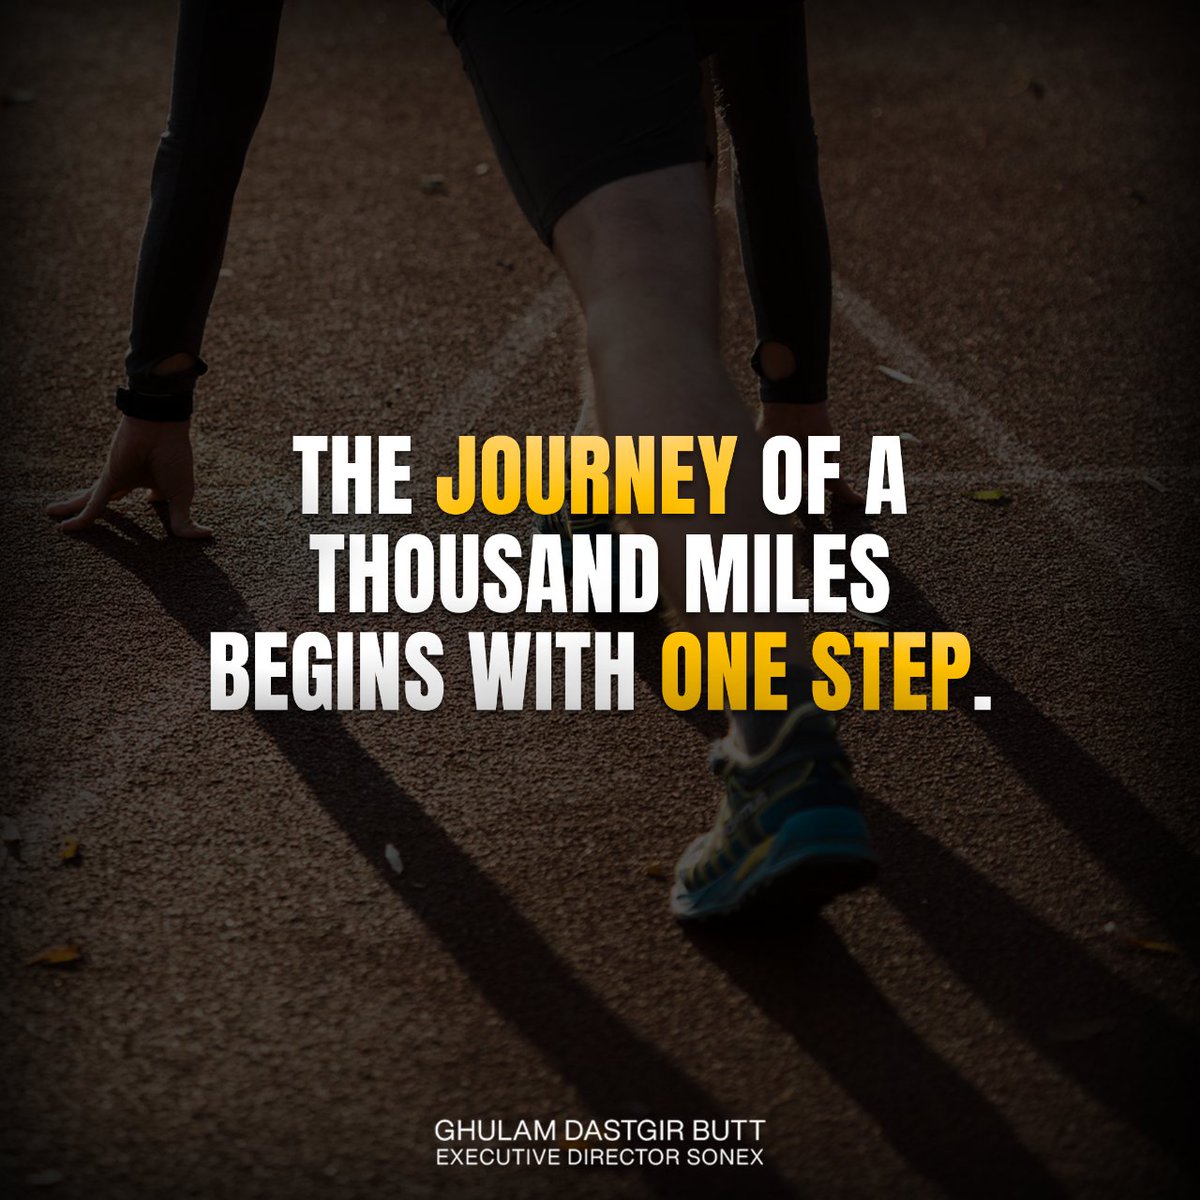 The journey of a thousand miles starts with just one step. Take that step today and embrace the adventure ahead.

#GhulamDastgirButt #youngentrepreneur #leadership #motivation #risktaker #journey #challenge #success #SelfDesign #YouAreUnique